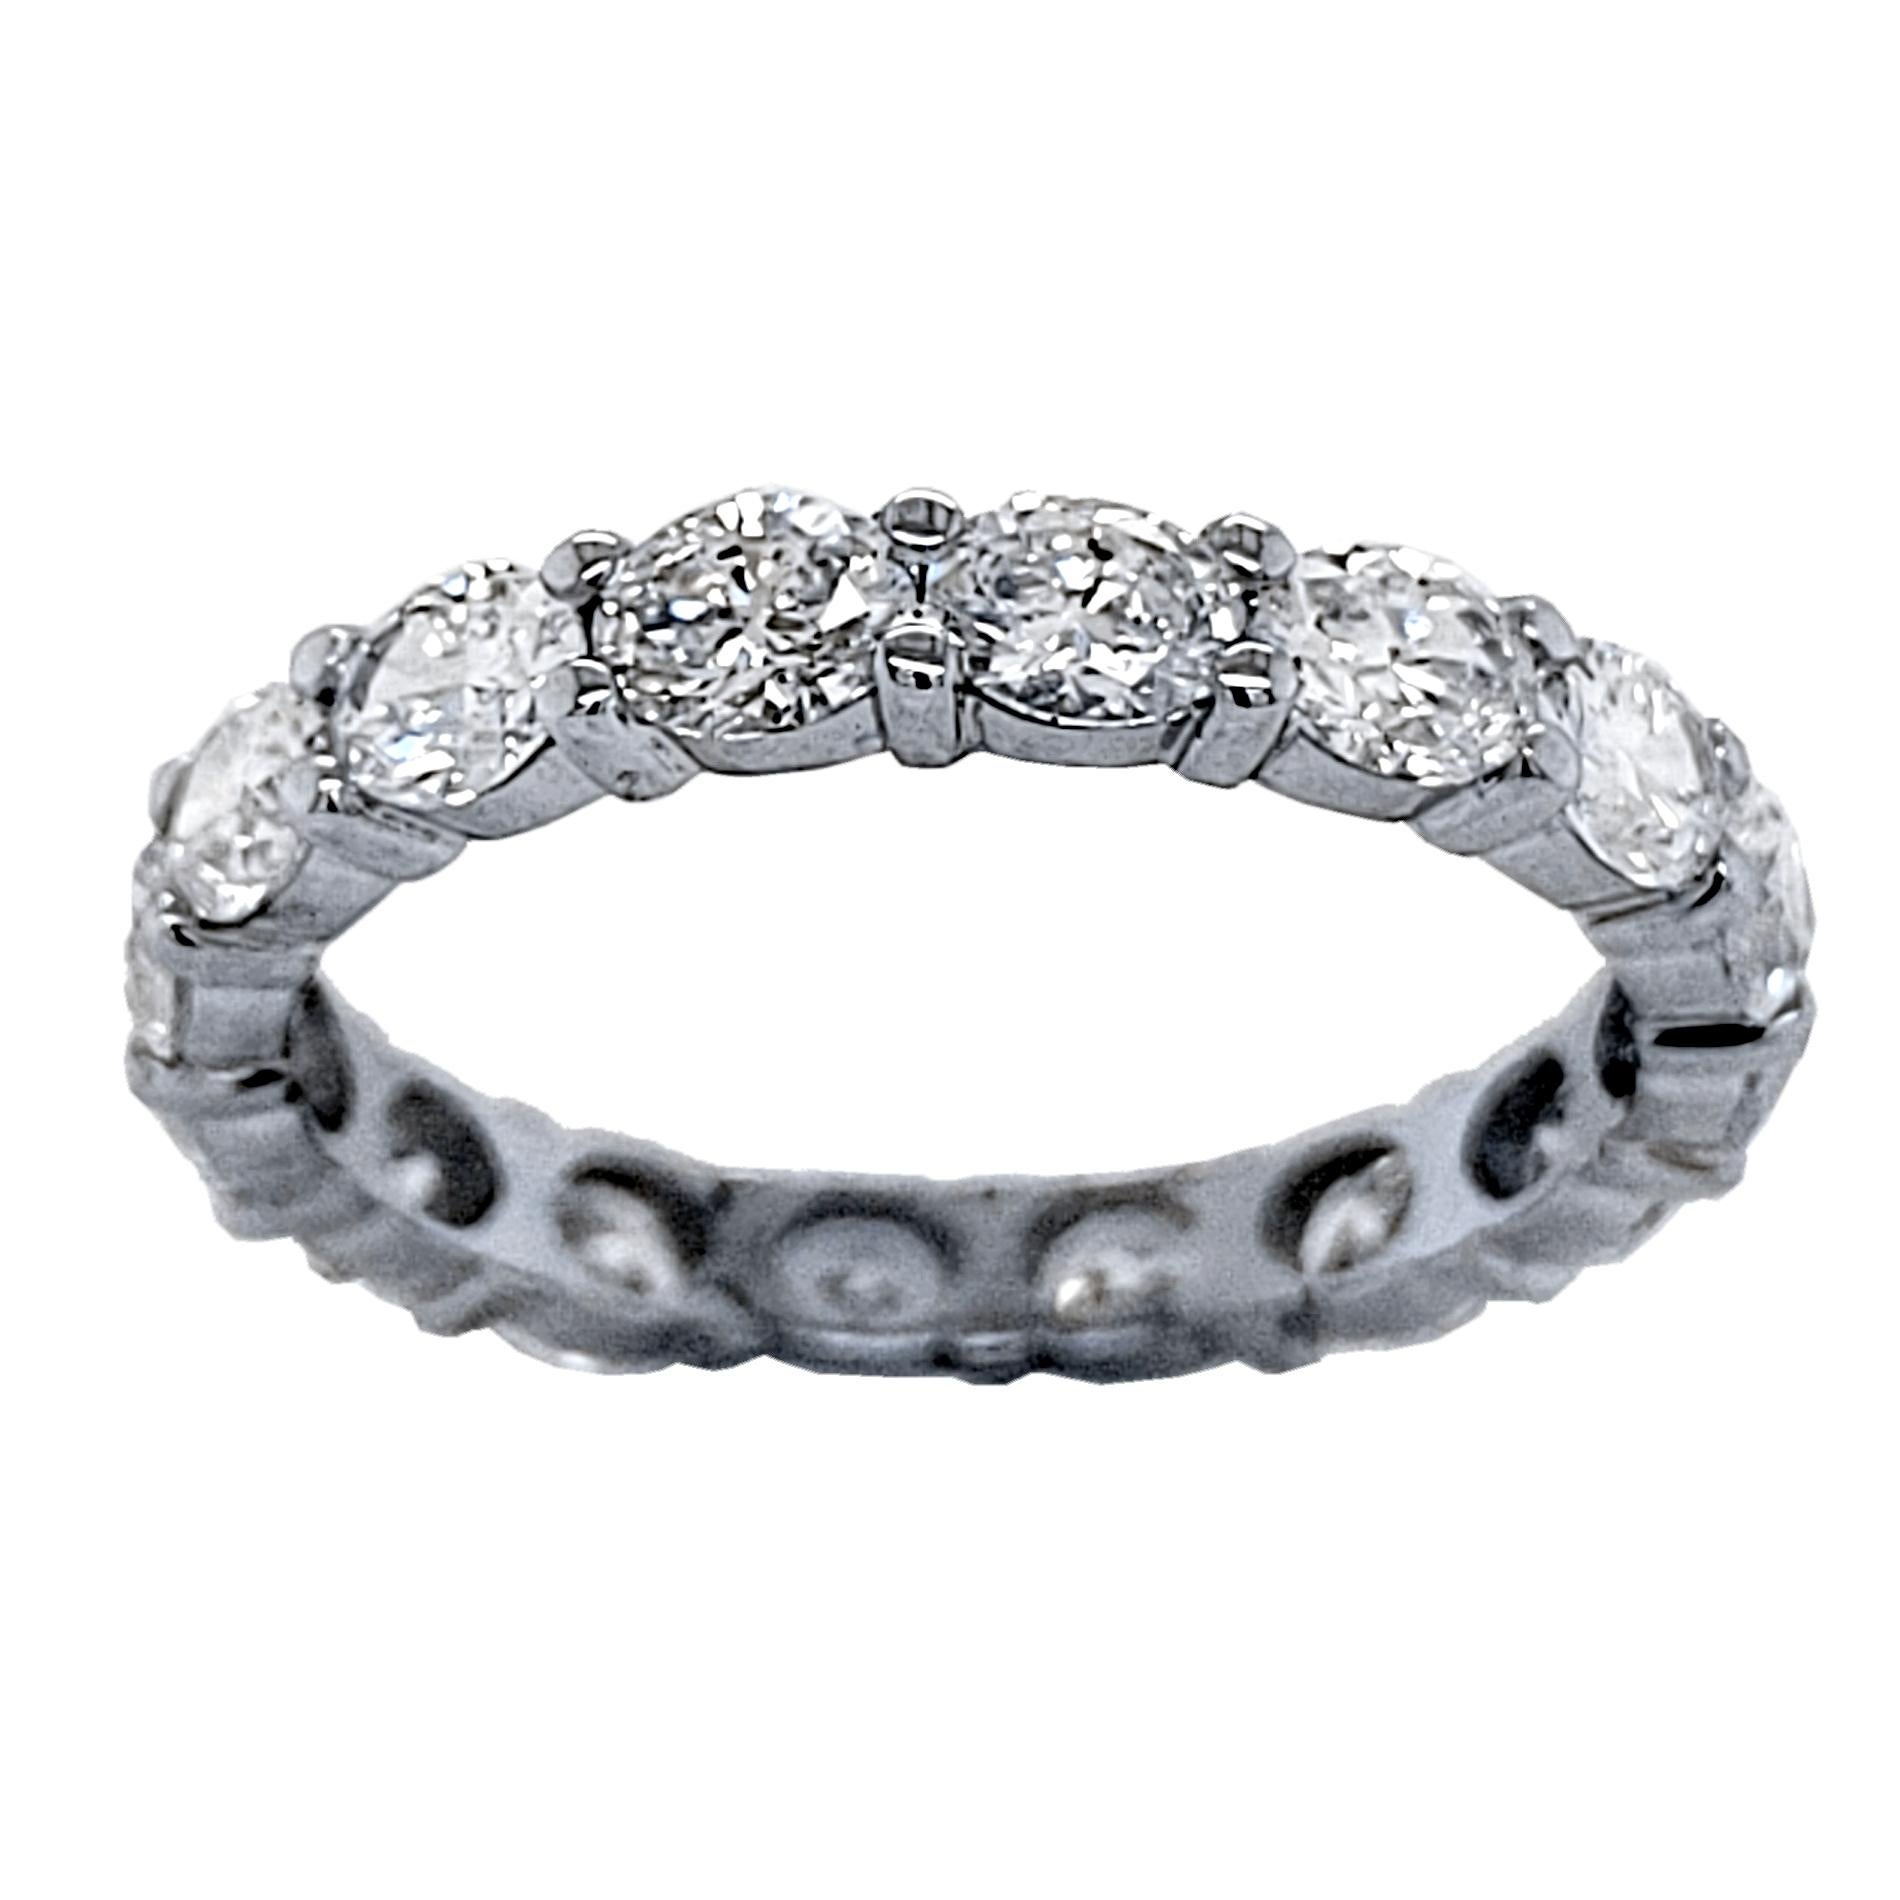 This beautiful Eternity Ring is made of 18K Gold with 16 perfectly matched (VS/F-G)  Oval Brilliant Diamonds Laterally Set in Shared Prong Mode.
Total Weight of diamonds: 2.32 Ct 
Total Weight of the Ring:  18K Gold, 2.50 Gr
Ring Size: 6.25